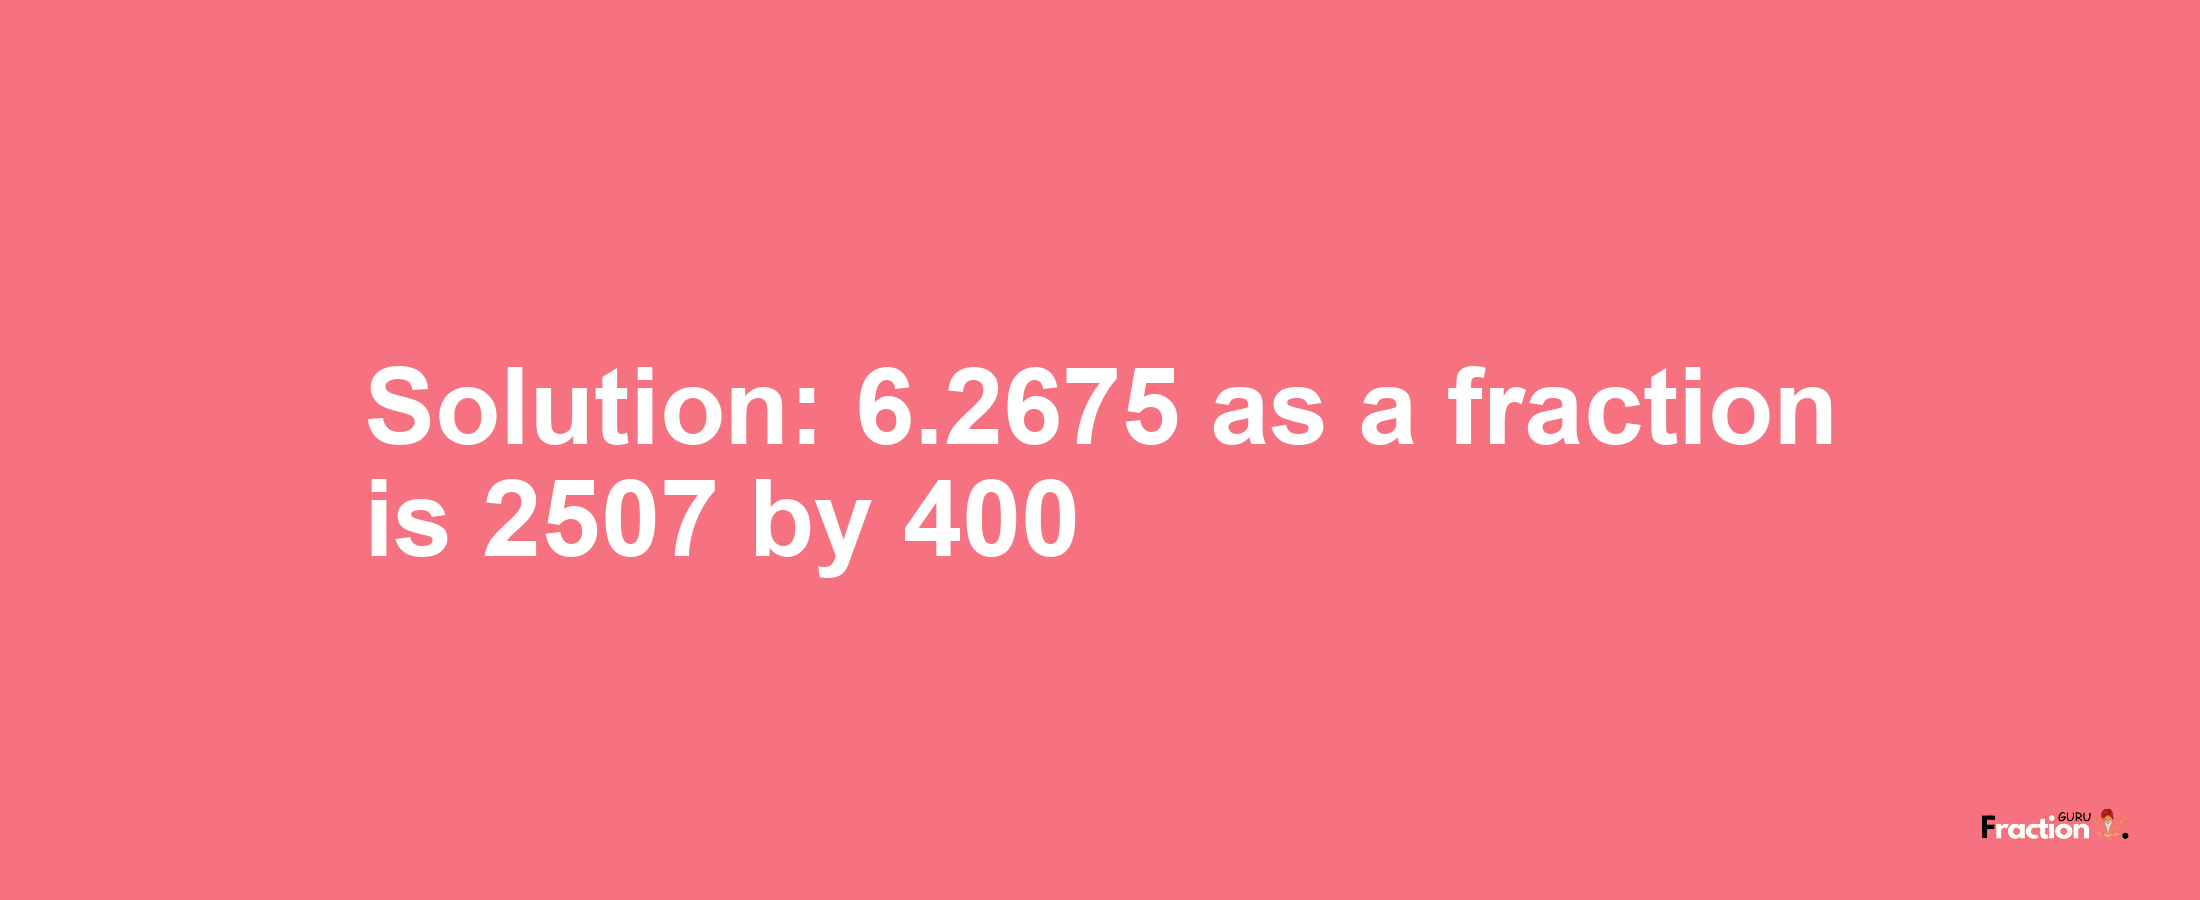 Solution:6.2675 as a fraction is 2507/400